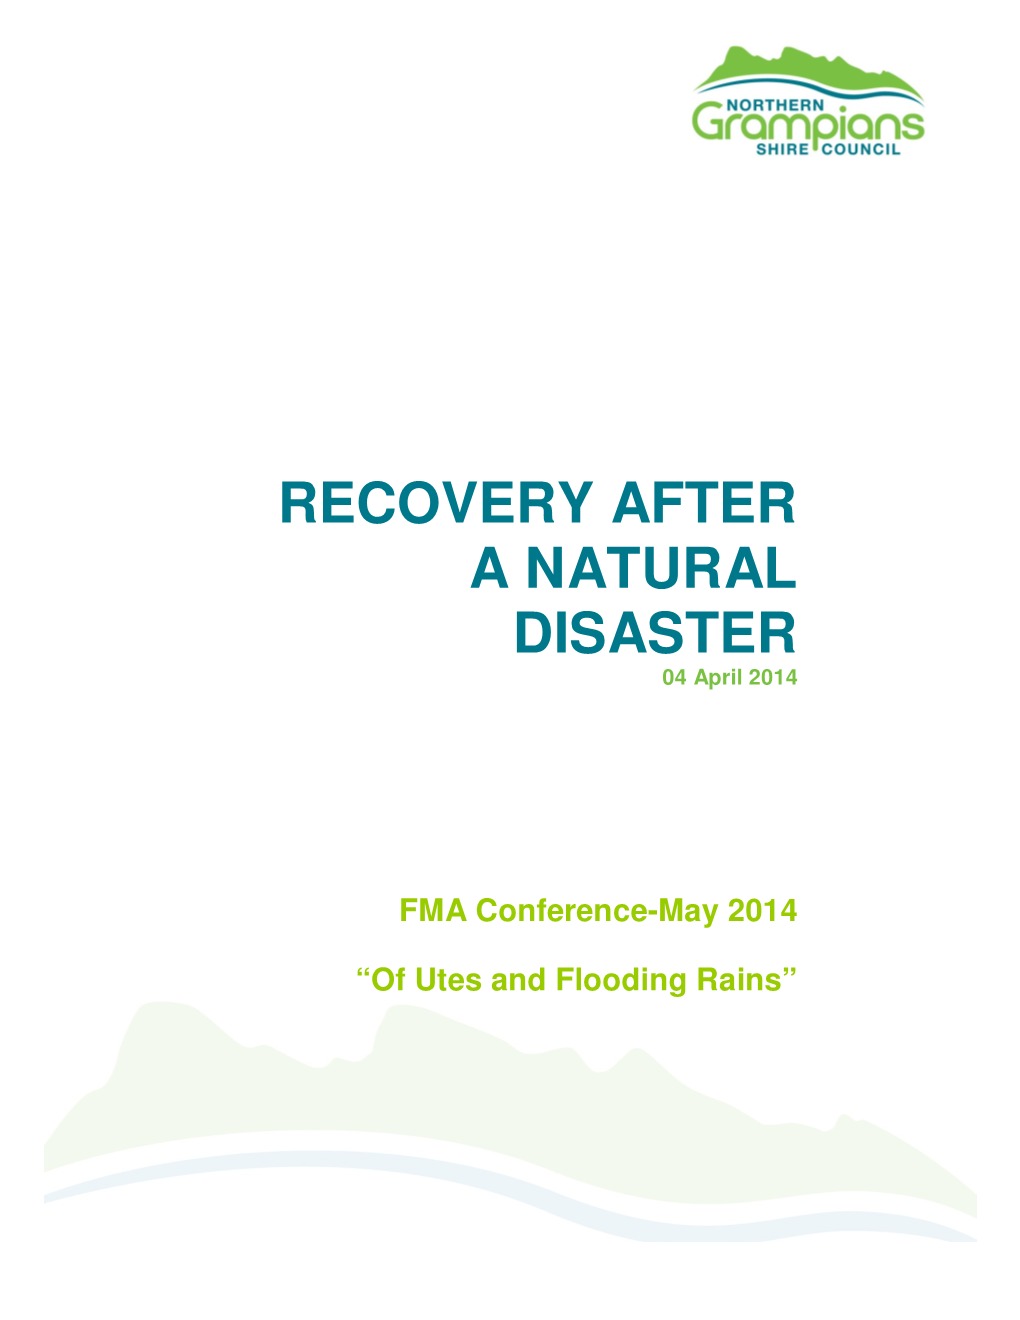 RECOVERY AFTER a NATURAL DISASTER 04 April 2014